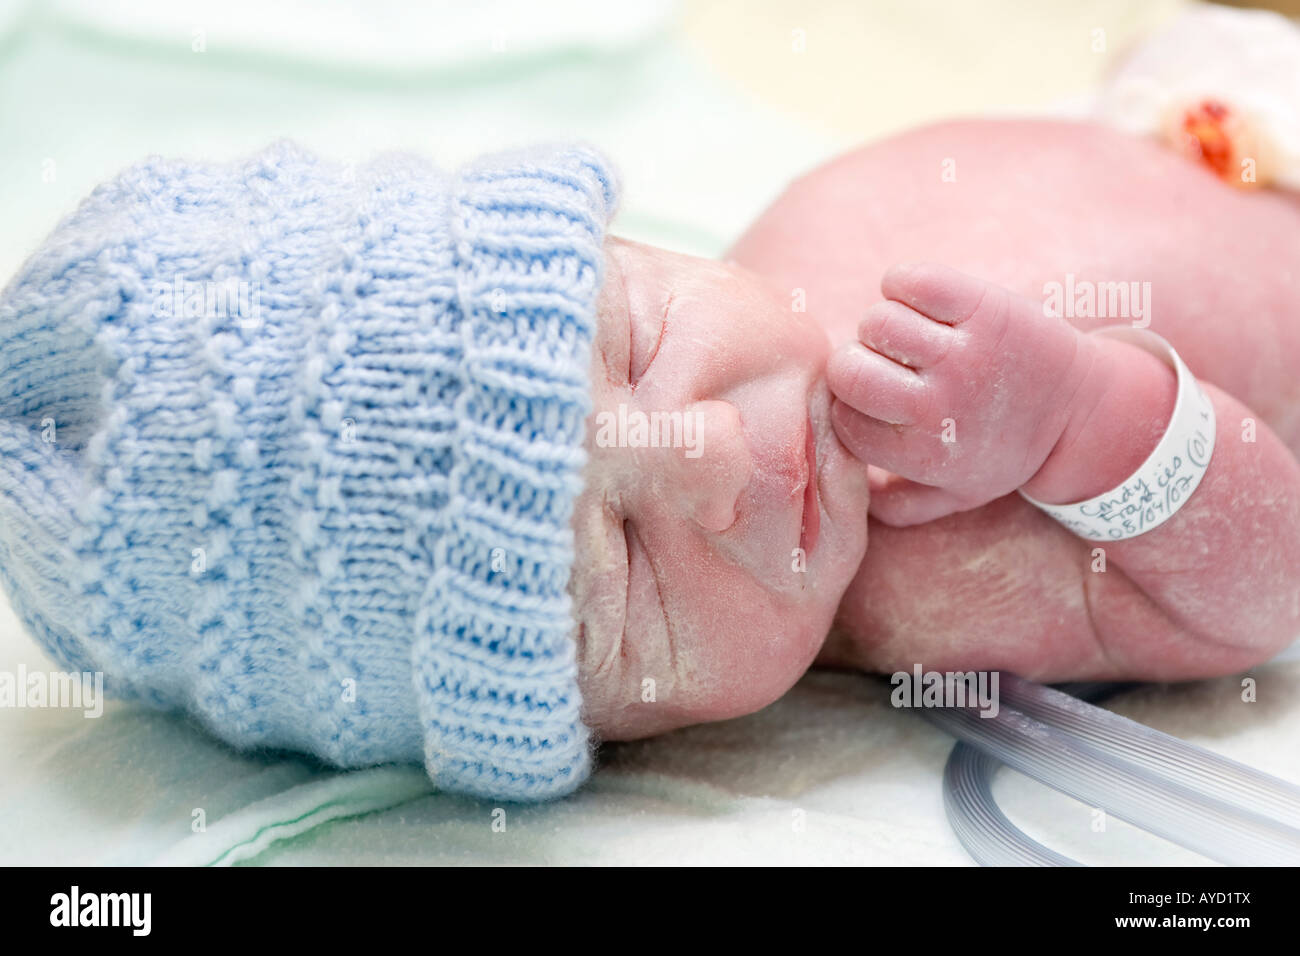 A 5 weeks premature baby seconds after being born Stock Photo